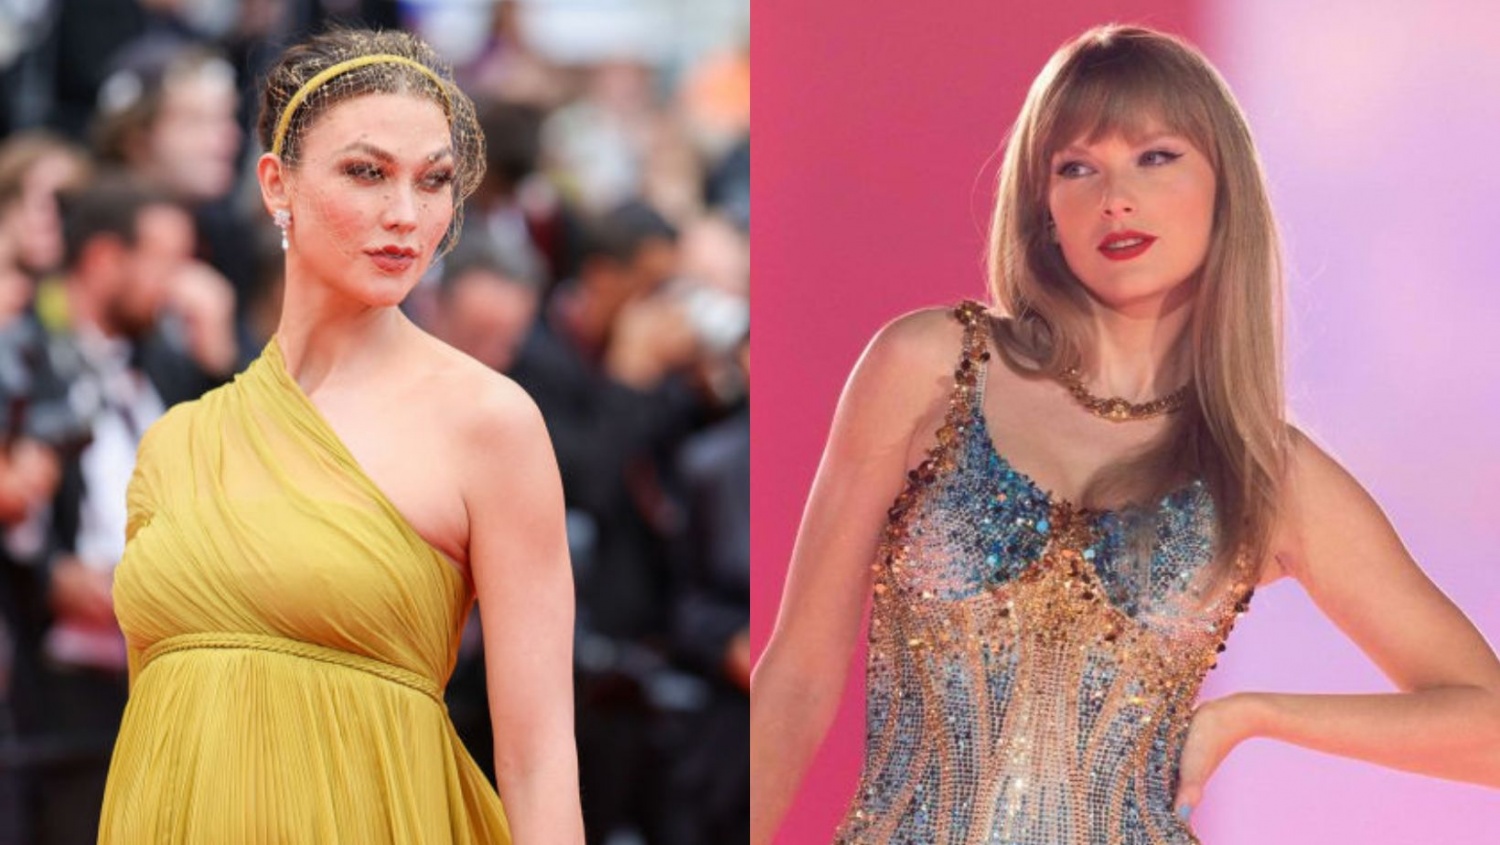 Taylor Swift, Karlie Kloss 'Feud' Re-Examined: Singer Cut Ties Because Model Was Managed by Scooter Braun?